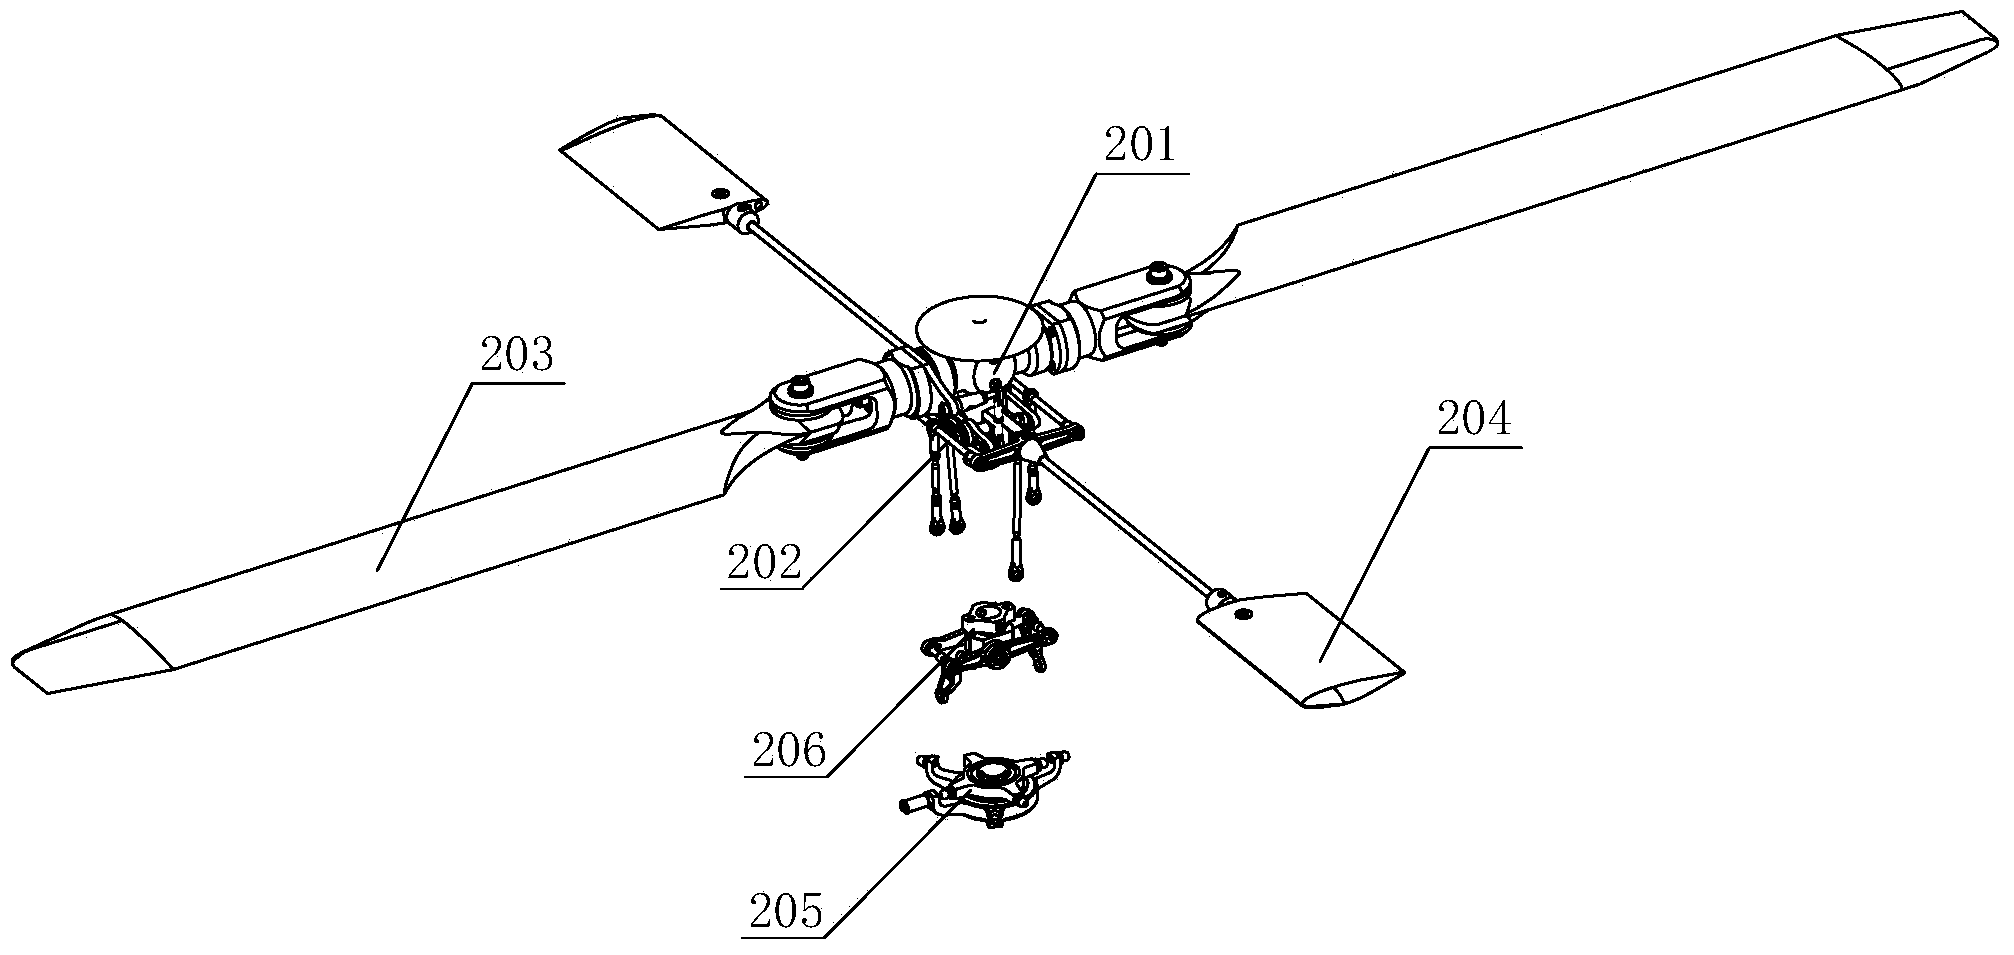 Vertical take-off and landing rotary wing type unmanned aerial vehicle